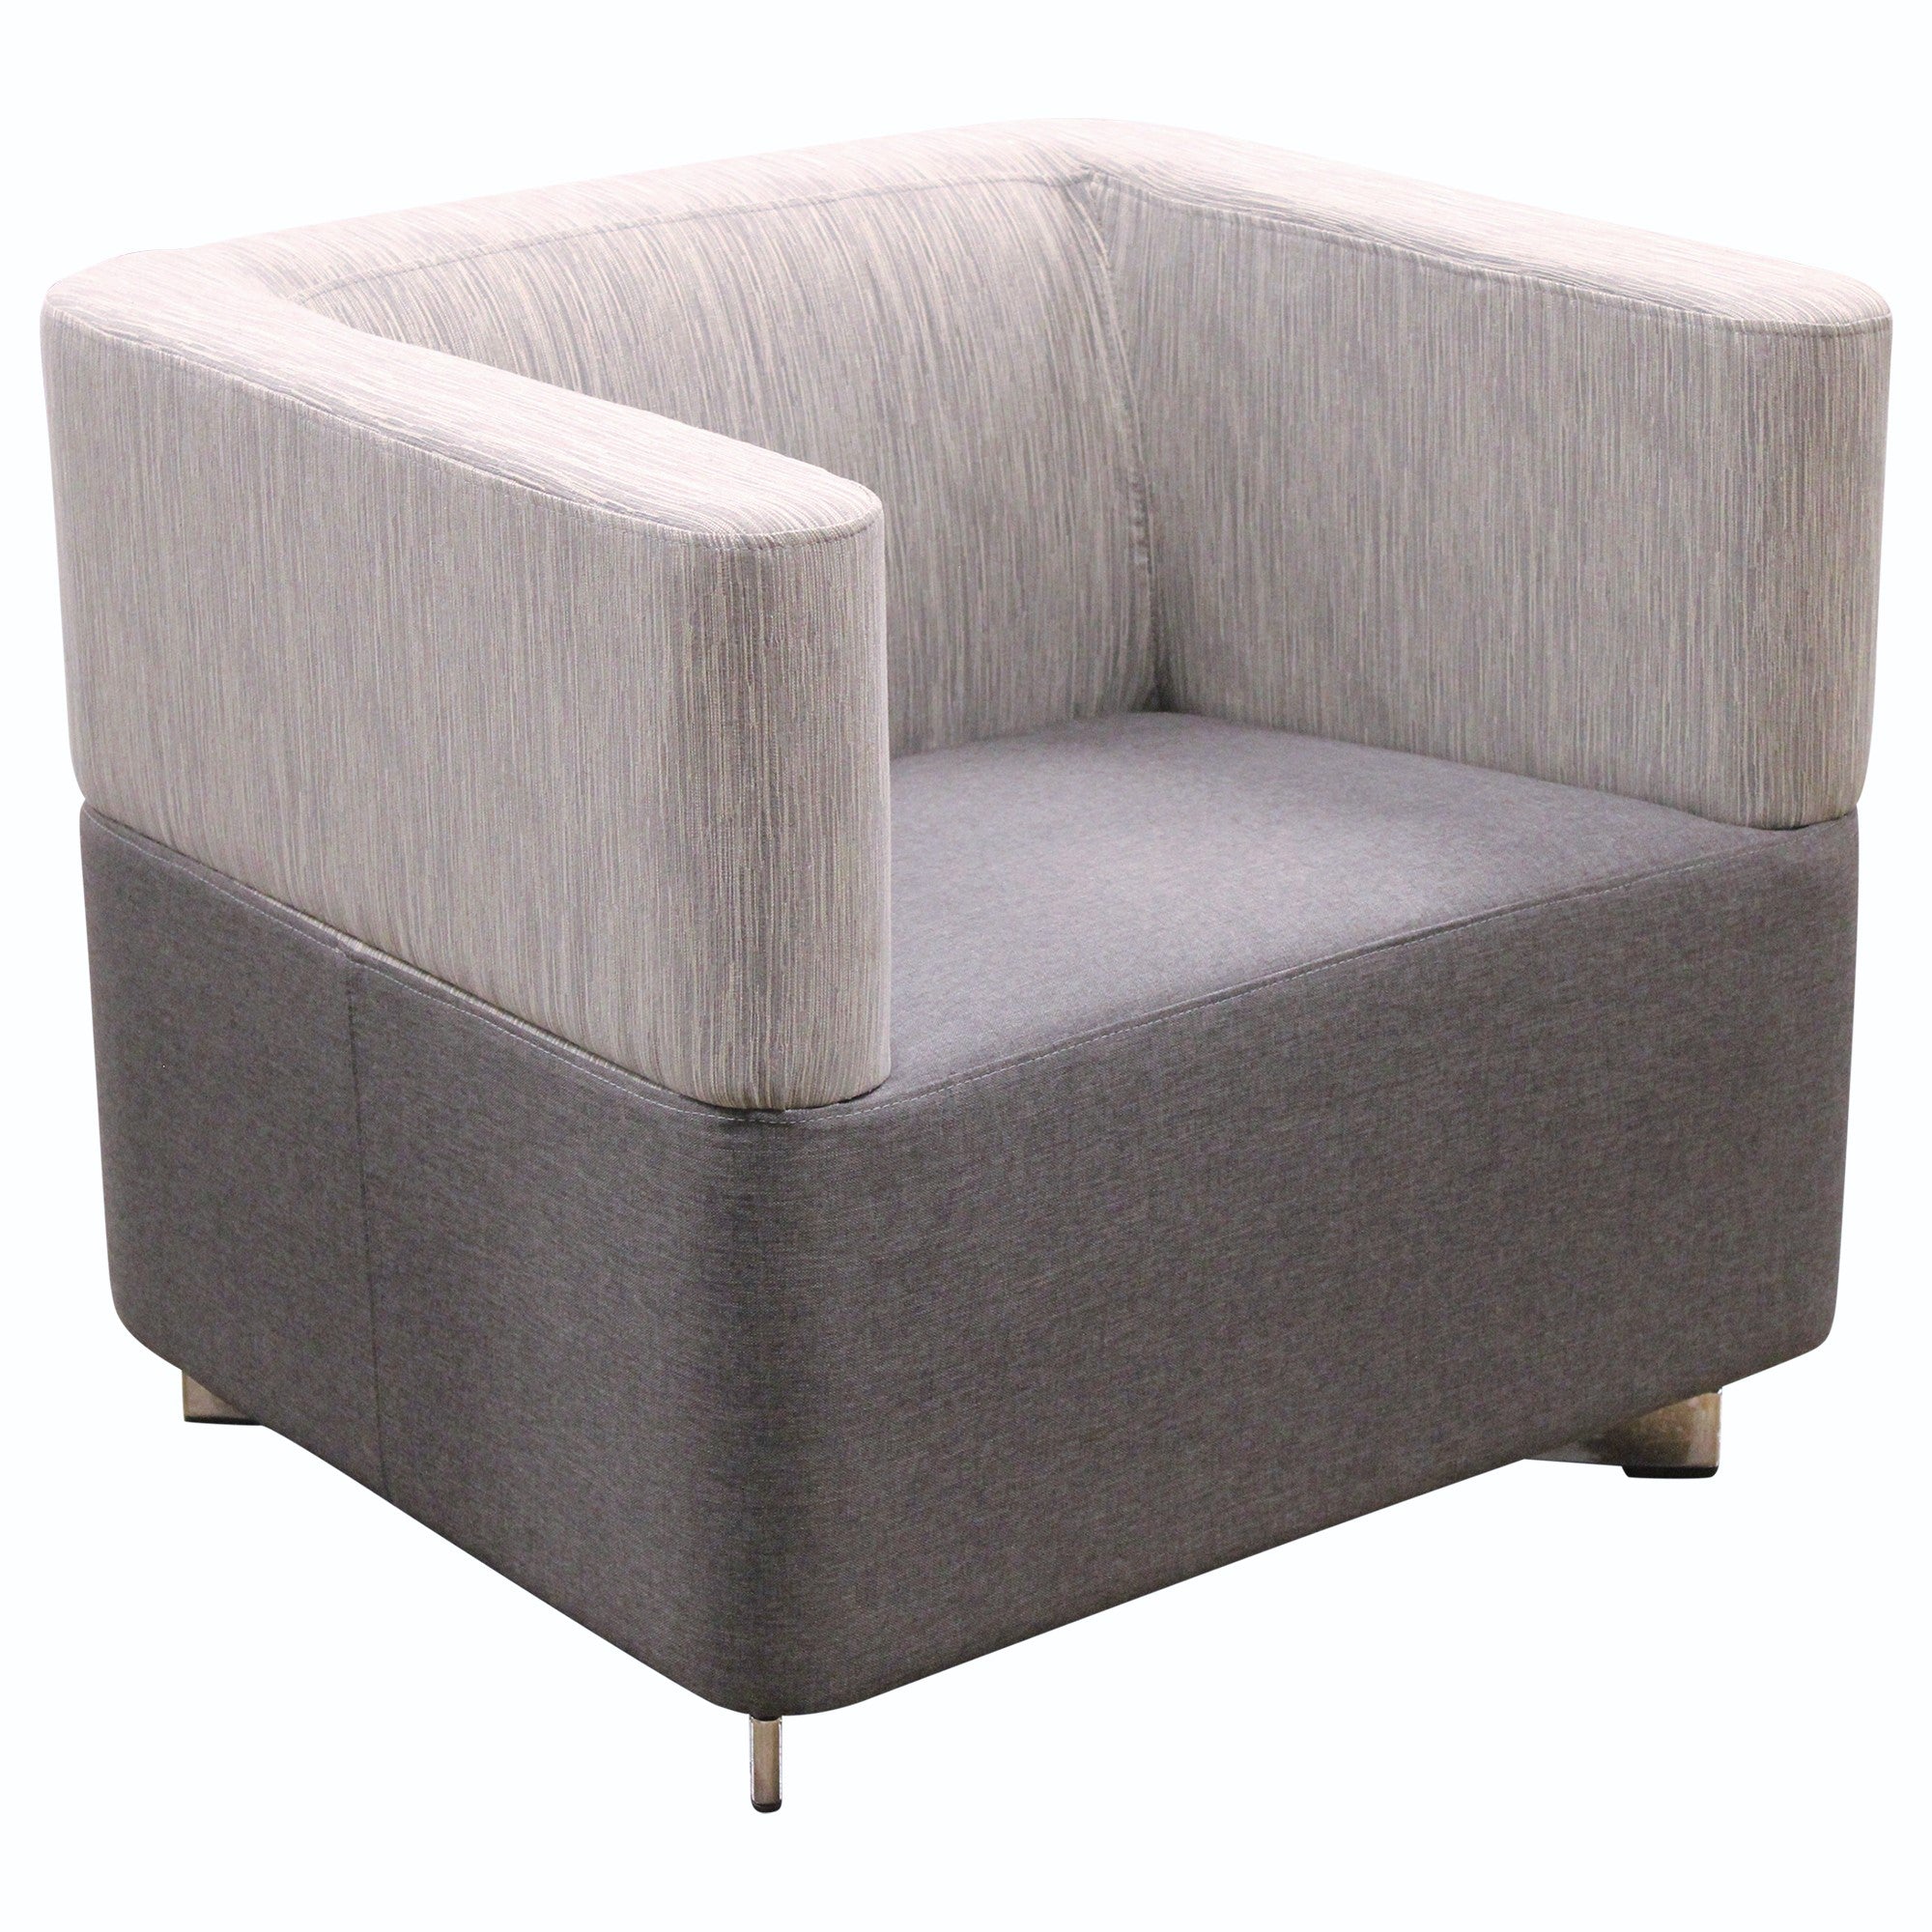 Davis Furniture Meo Lounge Chair, Light Grey - Preowned